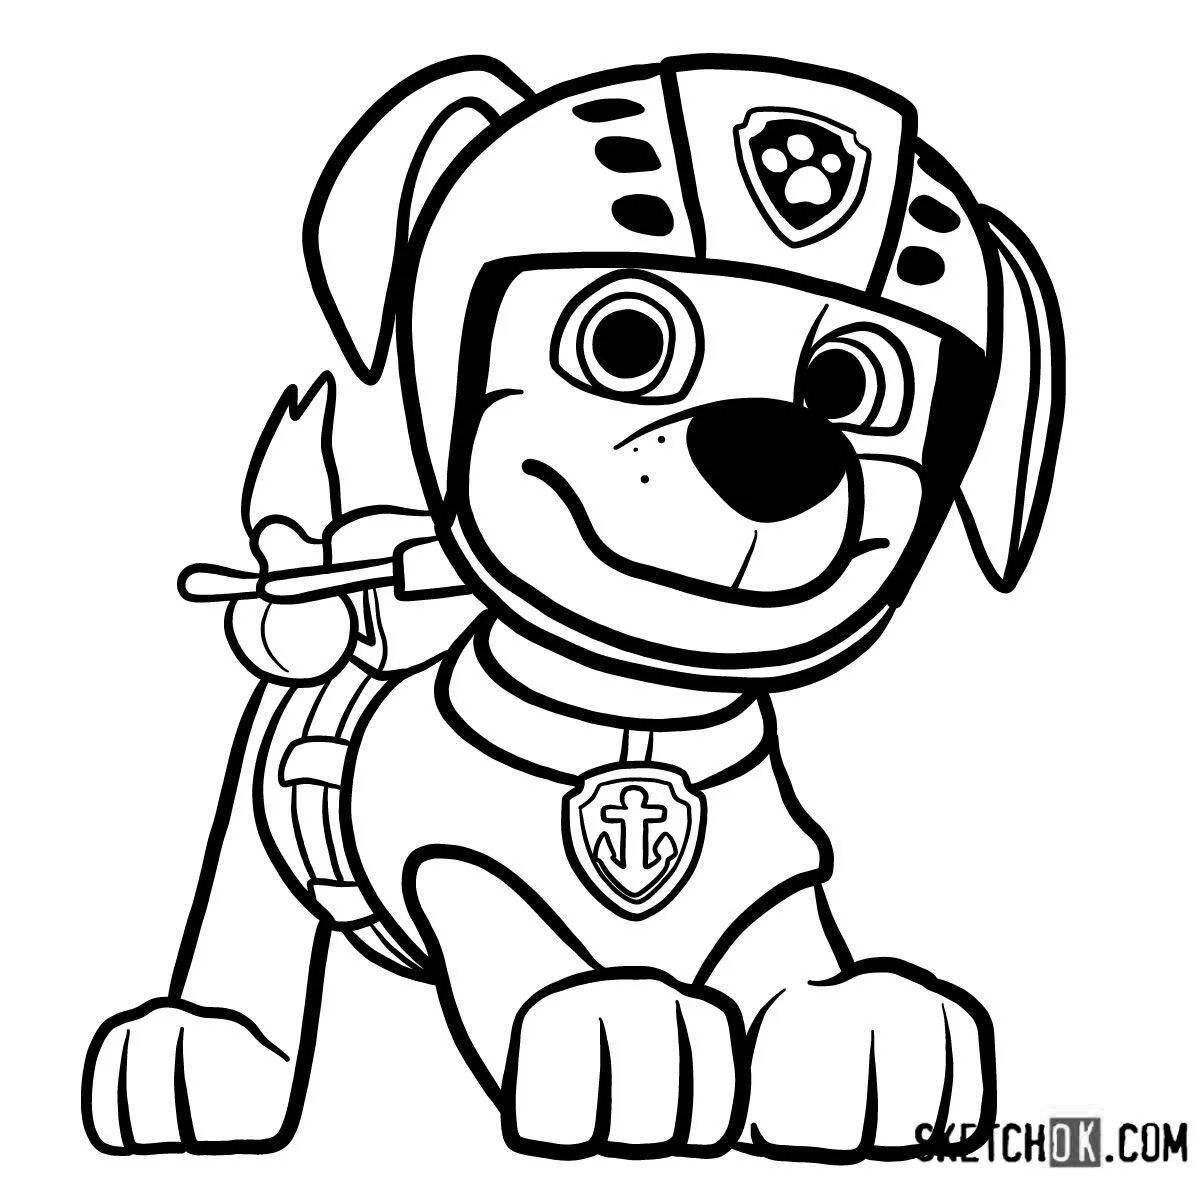 Paw patrol spectacular coloring video